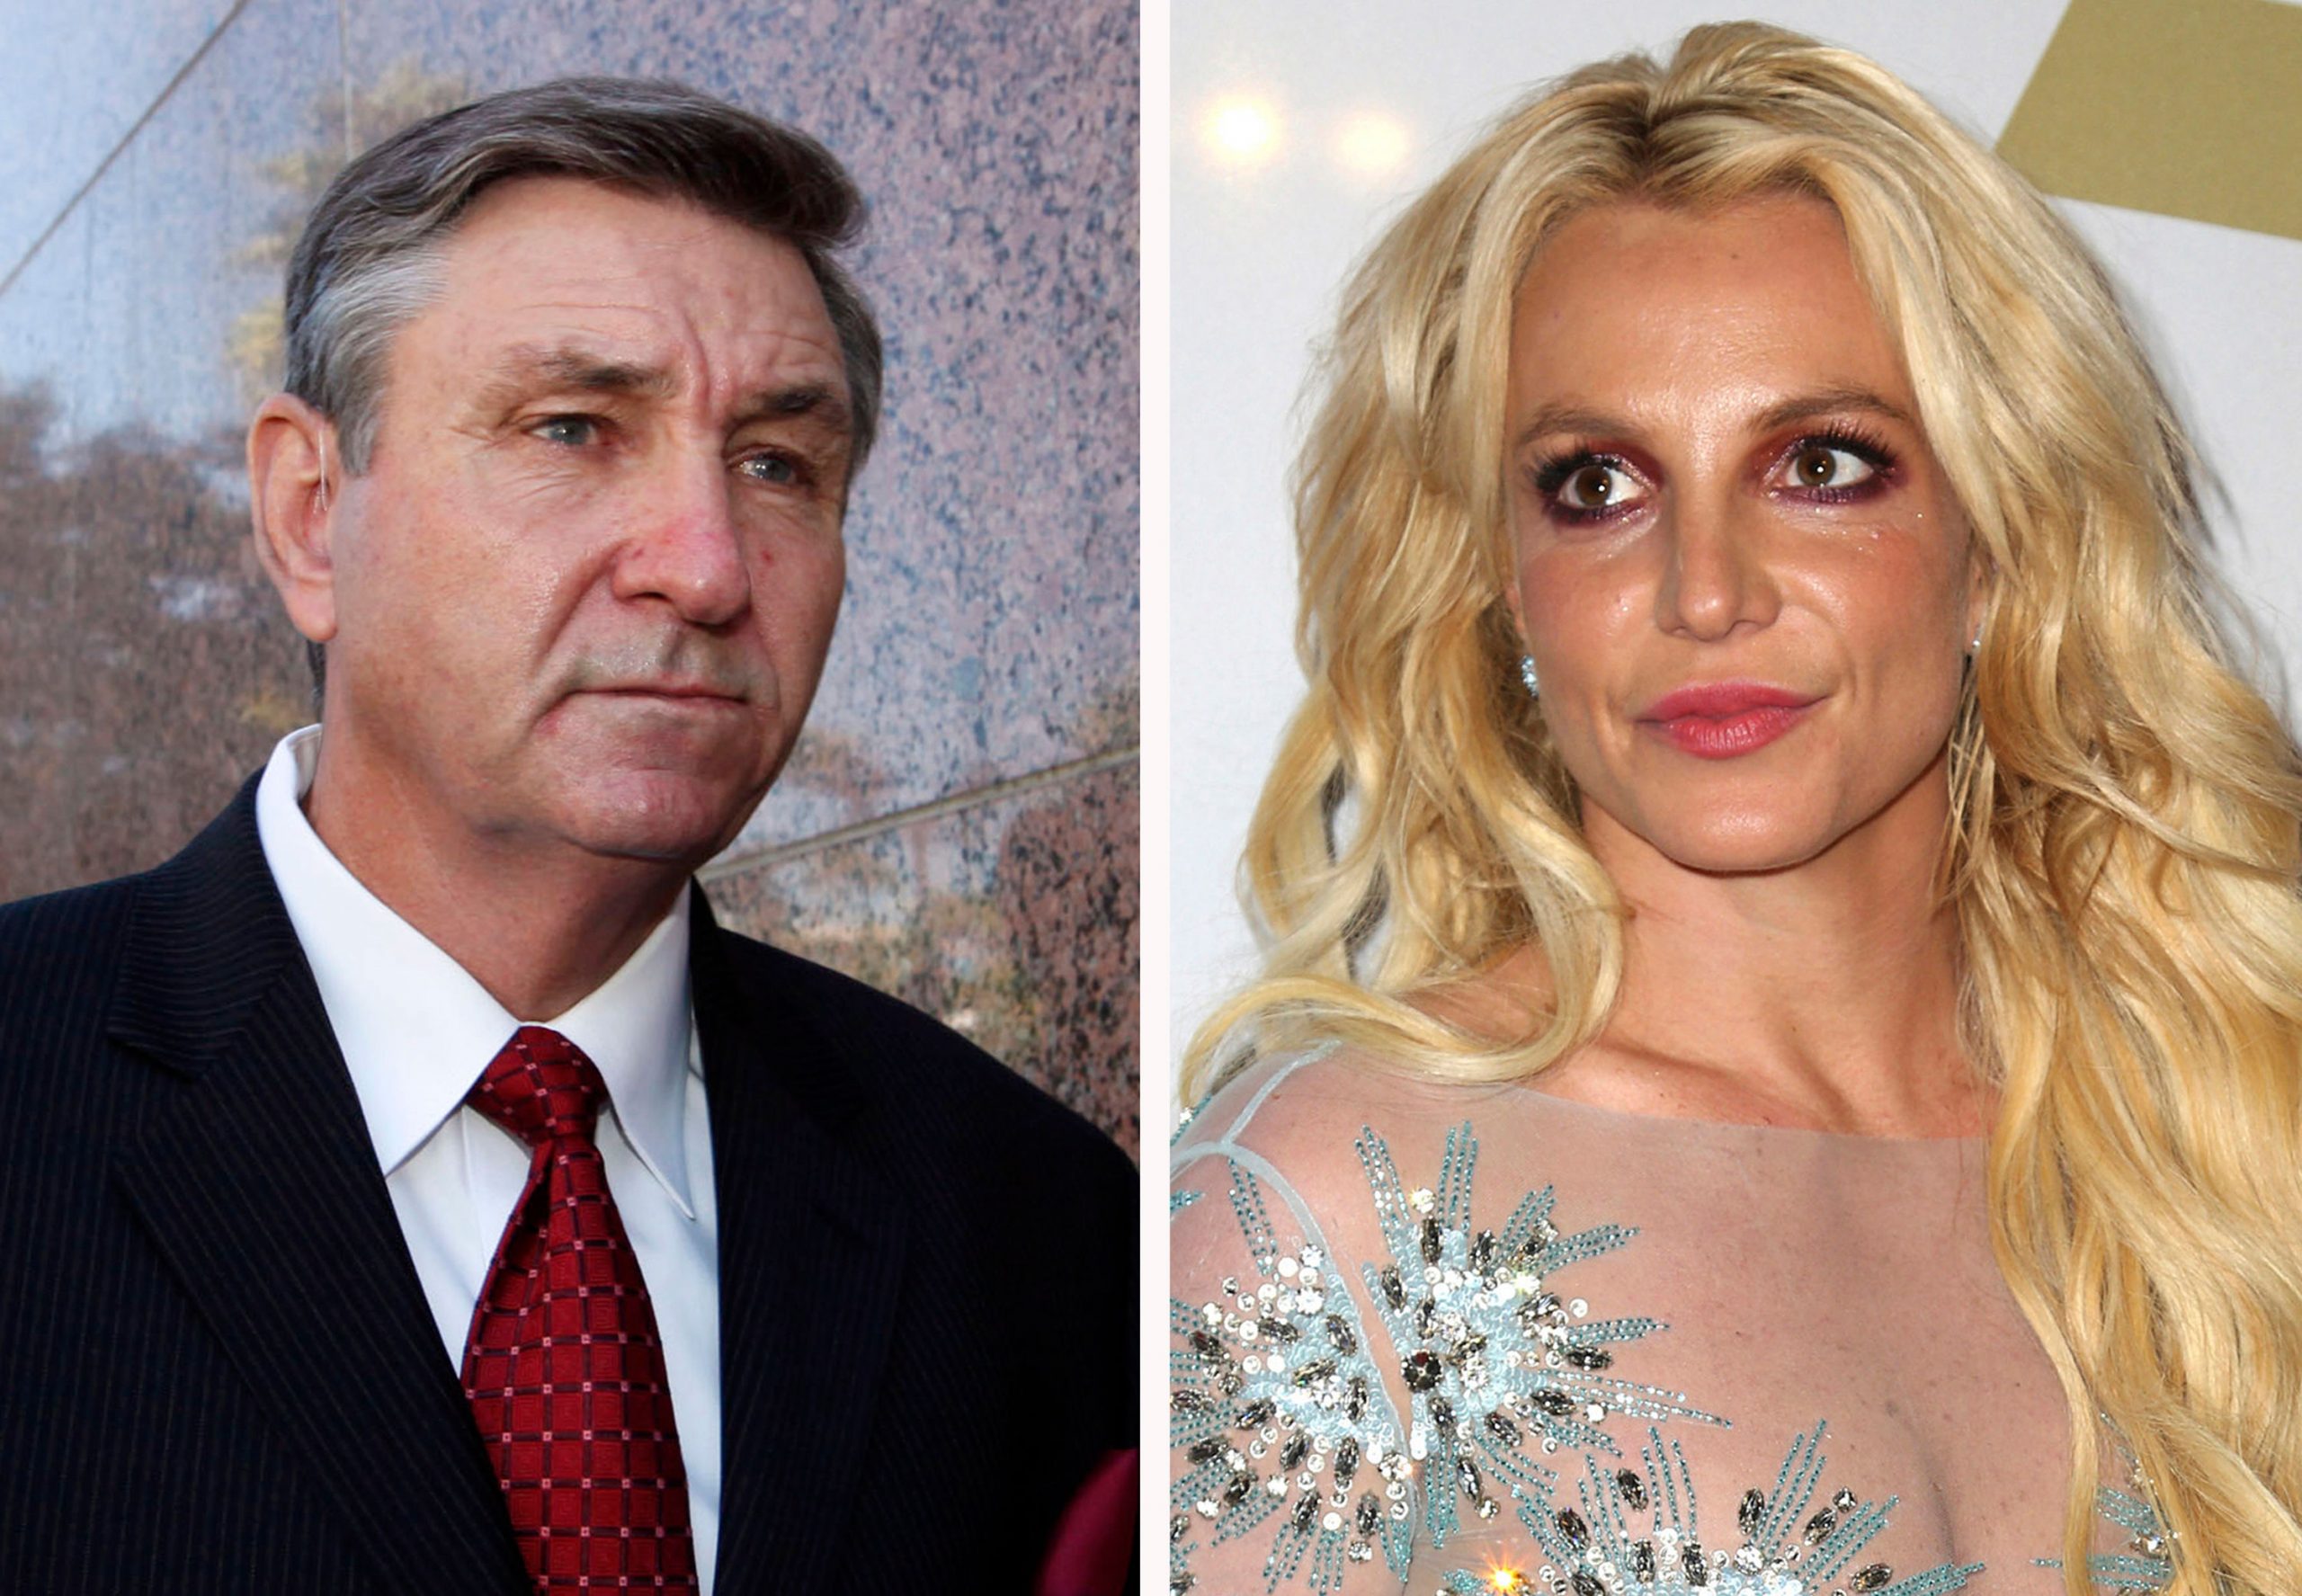 Britney Spears’ conservatorship terminated by Los Angeles judge